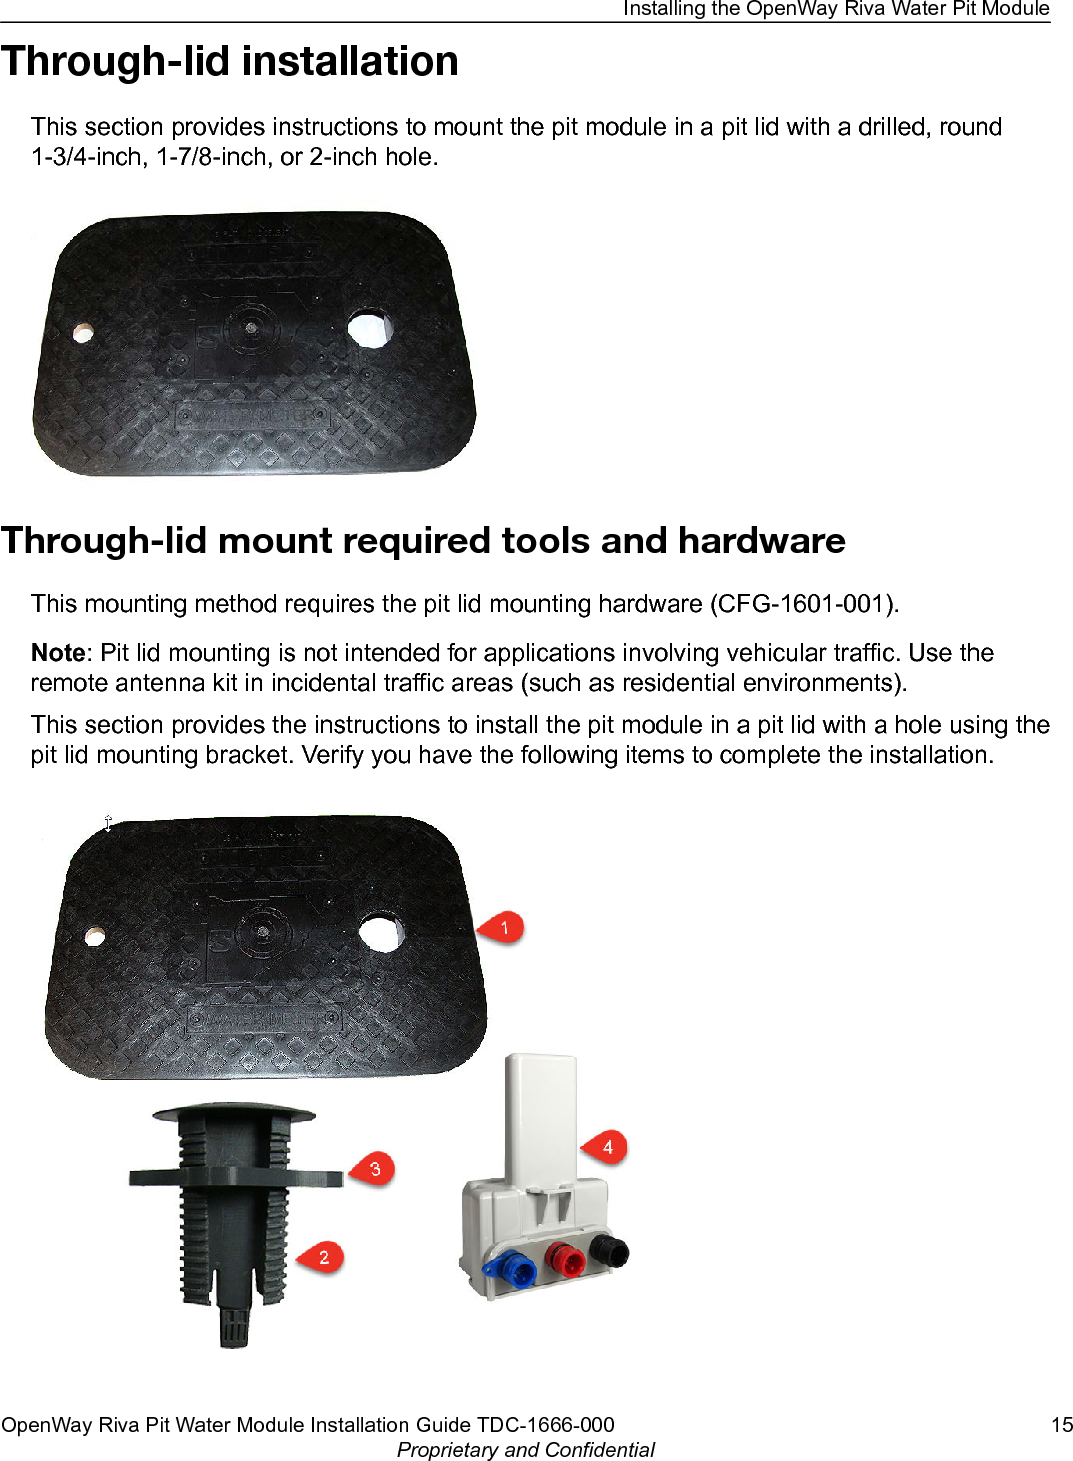 Through-lid installationThis section provides instructions to mount the pit module in a pit lid with a drilled, round1-3/4-inch, 1-7/8-inch, or 2-inch hole.Through-lid mount required tools and hardwareThis mounting method requires the pit lid mounting hardware (CFG-1601-001).Note: Pit lid mounting is not intended for applications involving vehicular traffic. Use theremote antenna kit in incidental traffic areas (such as residential environments).This section provides the instructions to install the pit module in a pit lid with a hole using thepit lid mounting bracket. Verify you have the following items to complete the installation.Installing the OpenWay Riva Water Pit ModuleOpenWay Riva Pit Water Module Installation Guide TDC-1666-000 15Proprietary and Confidential